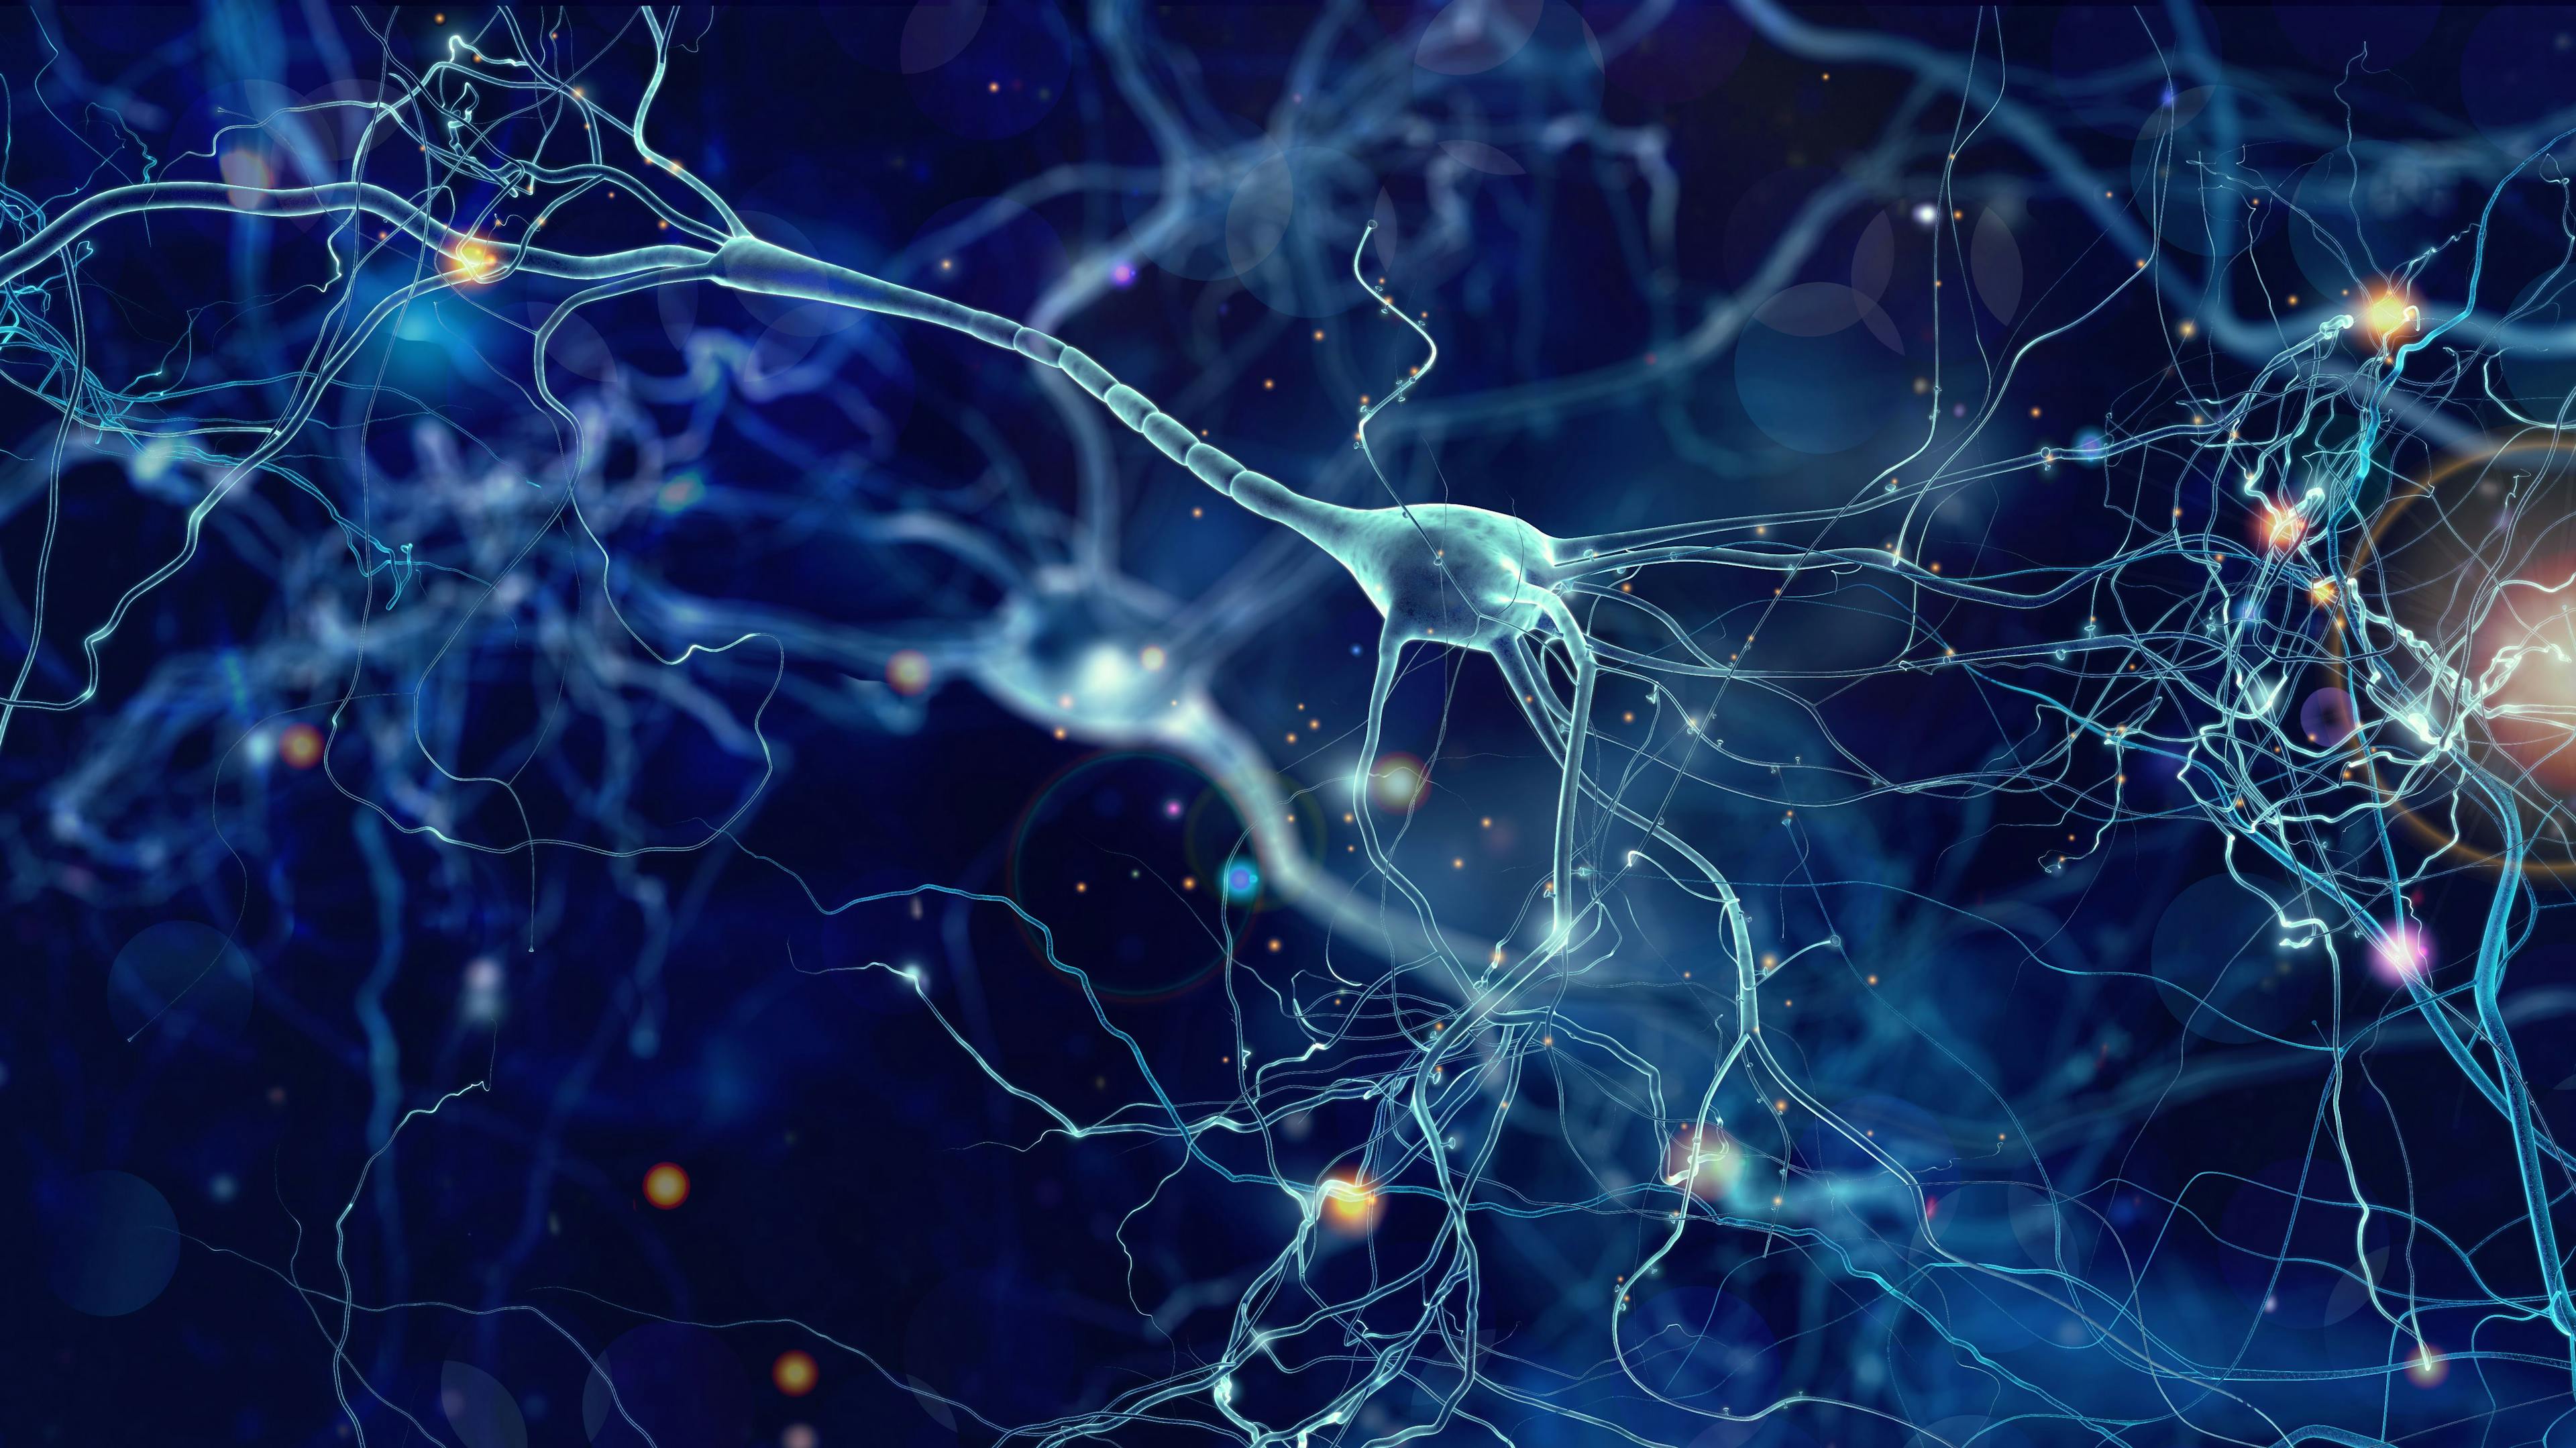 Neurons cells concept | Image Credit: whitehoune - stock.adobe.com